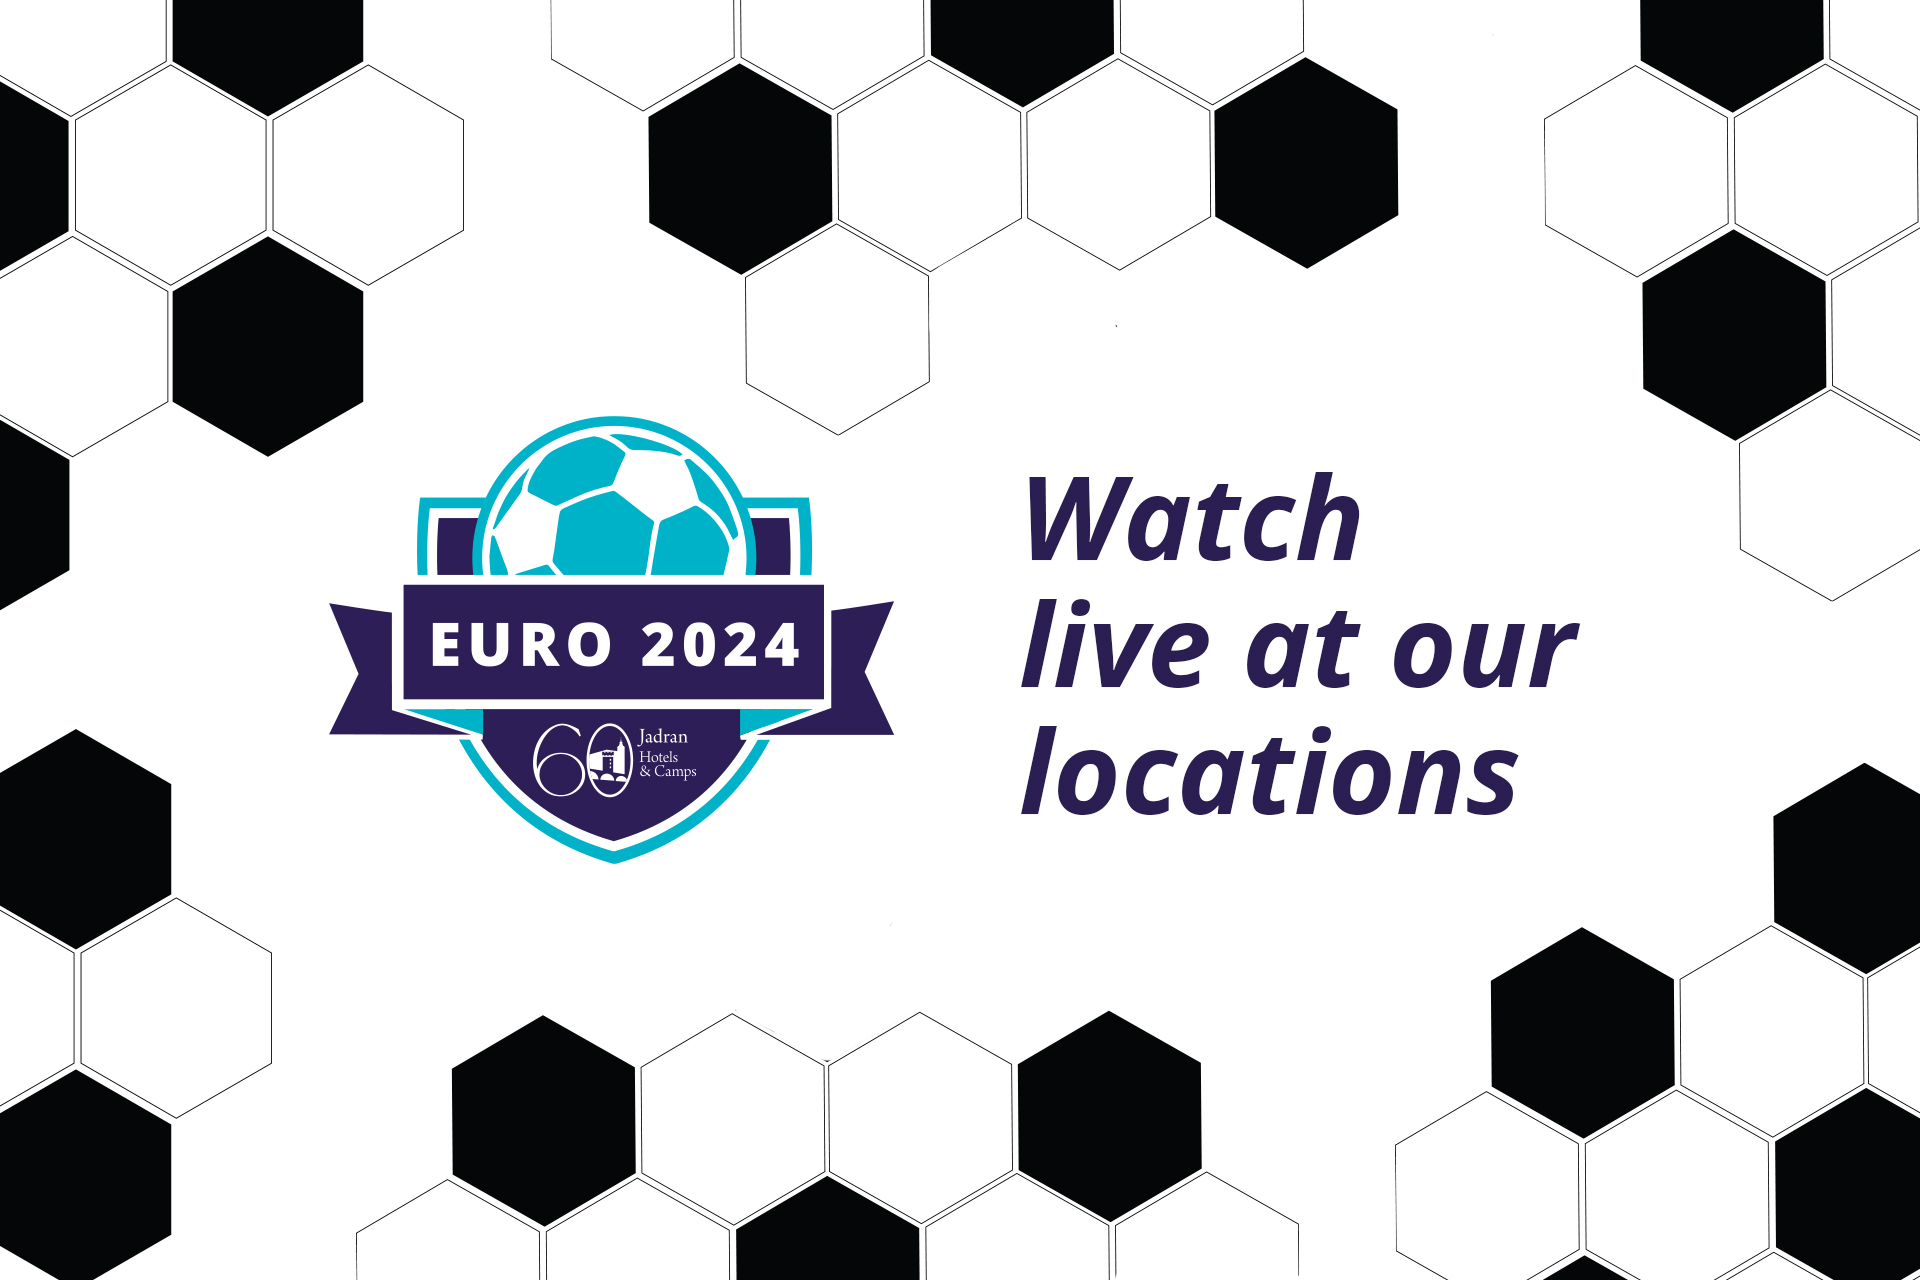 We invite you to join us for watching the EURO 2024 matches together!